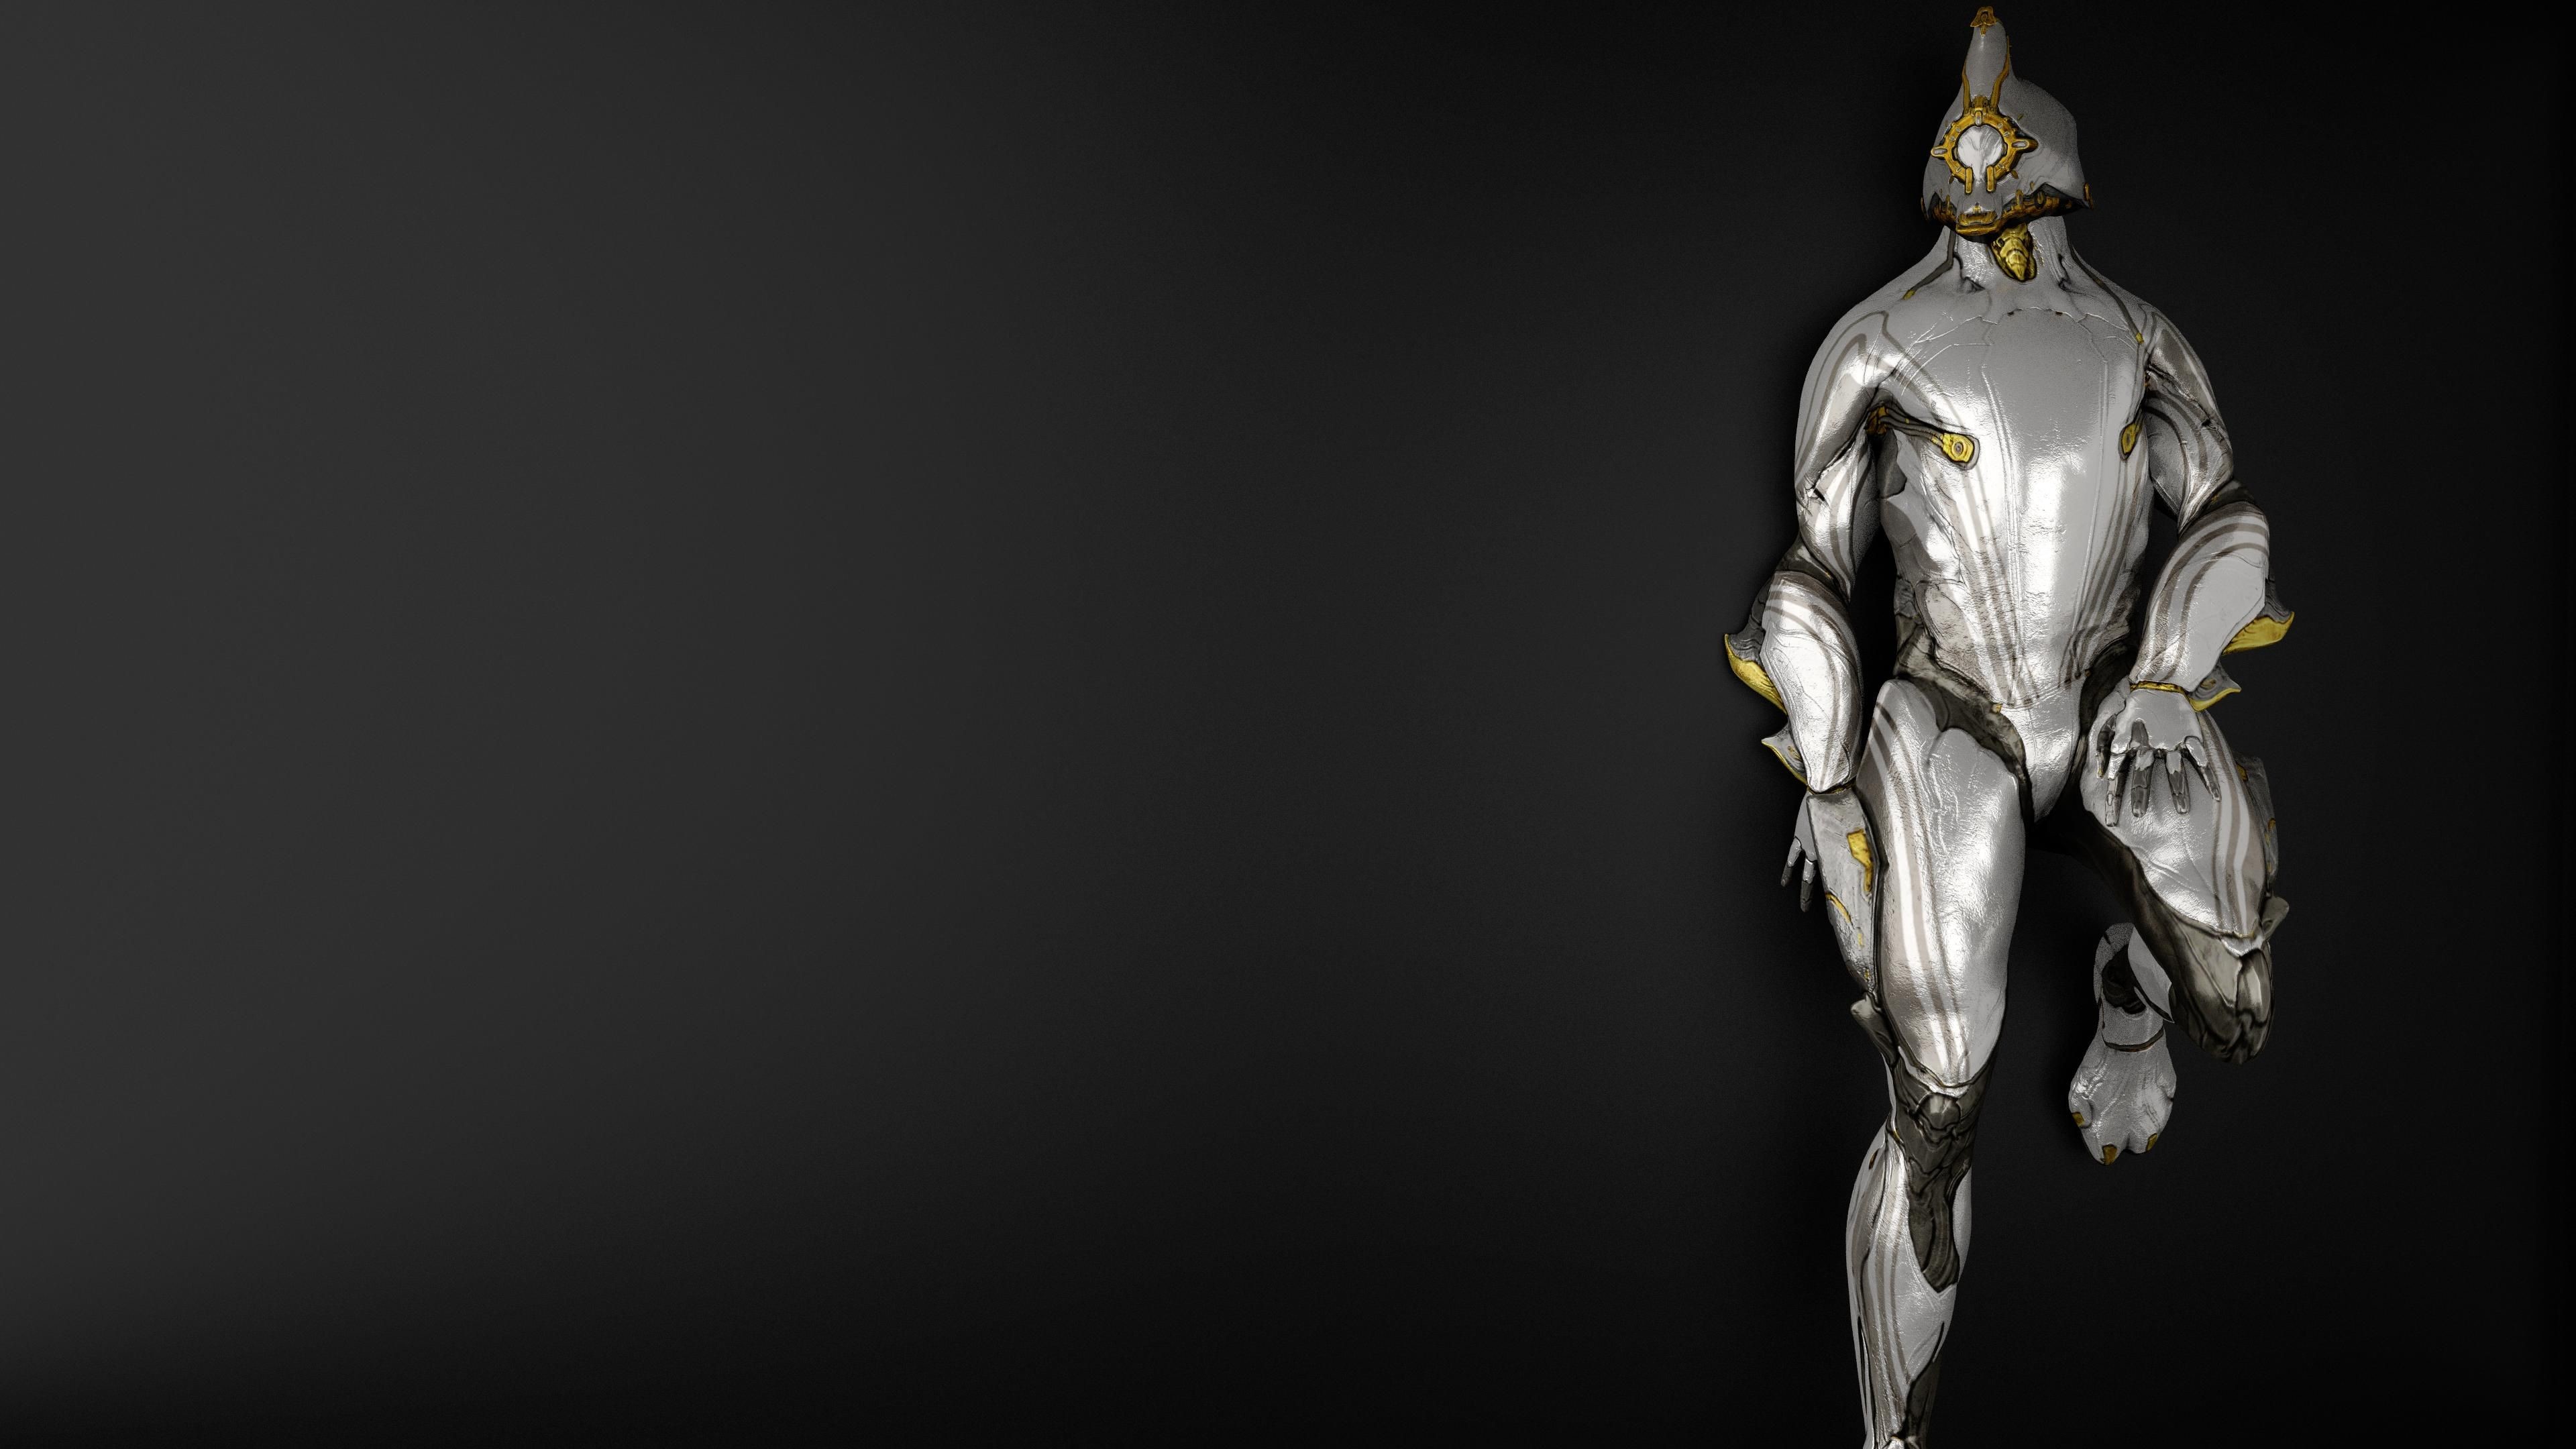 3840x2160 Warframe HD Wallpapers and Backgrounds